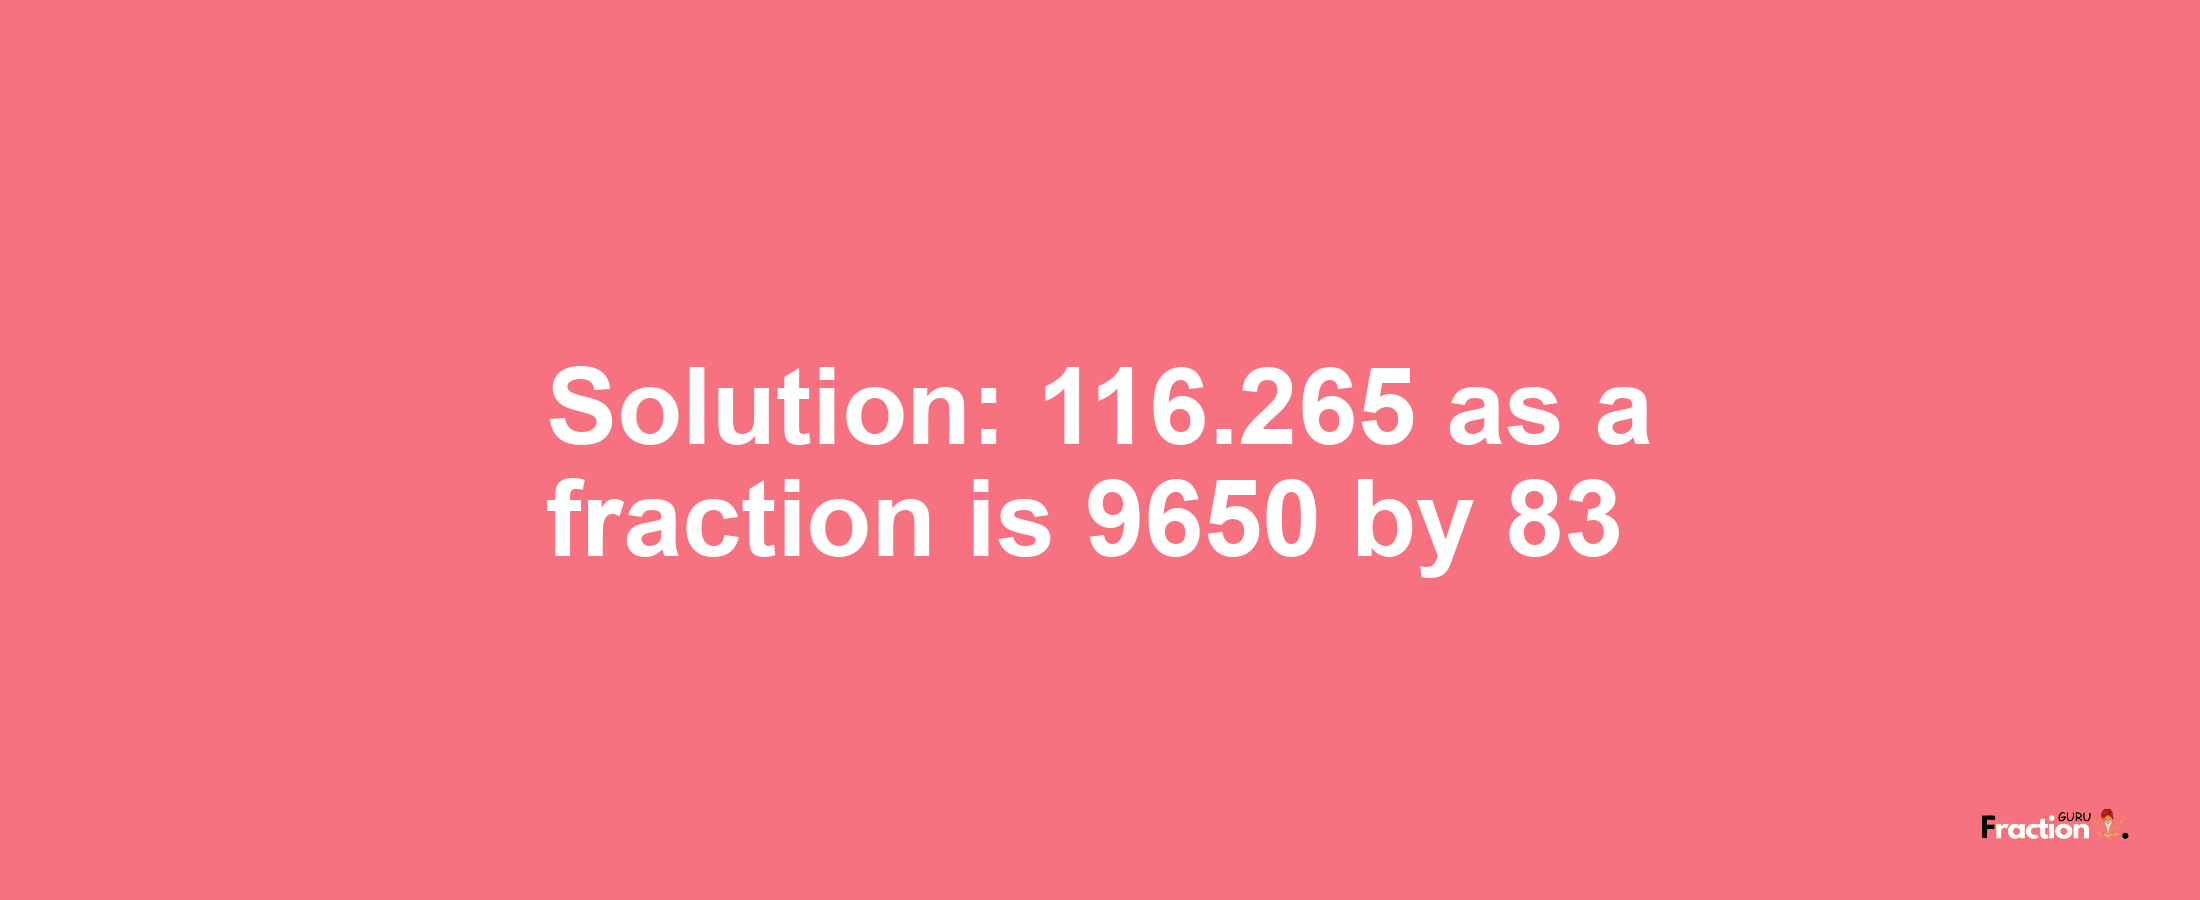 Solution:116.265 as a fraction is 9650/83